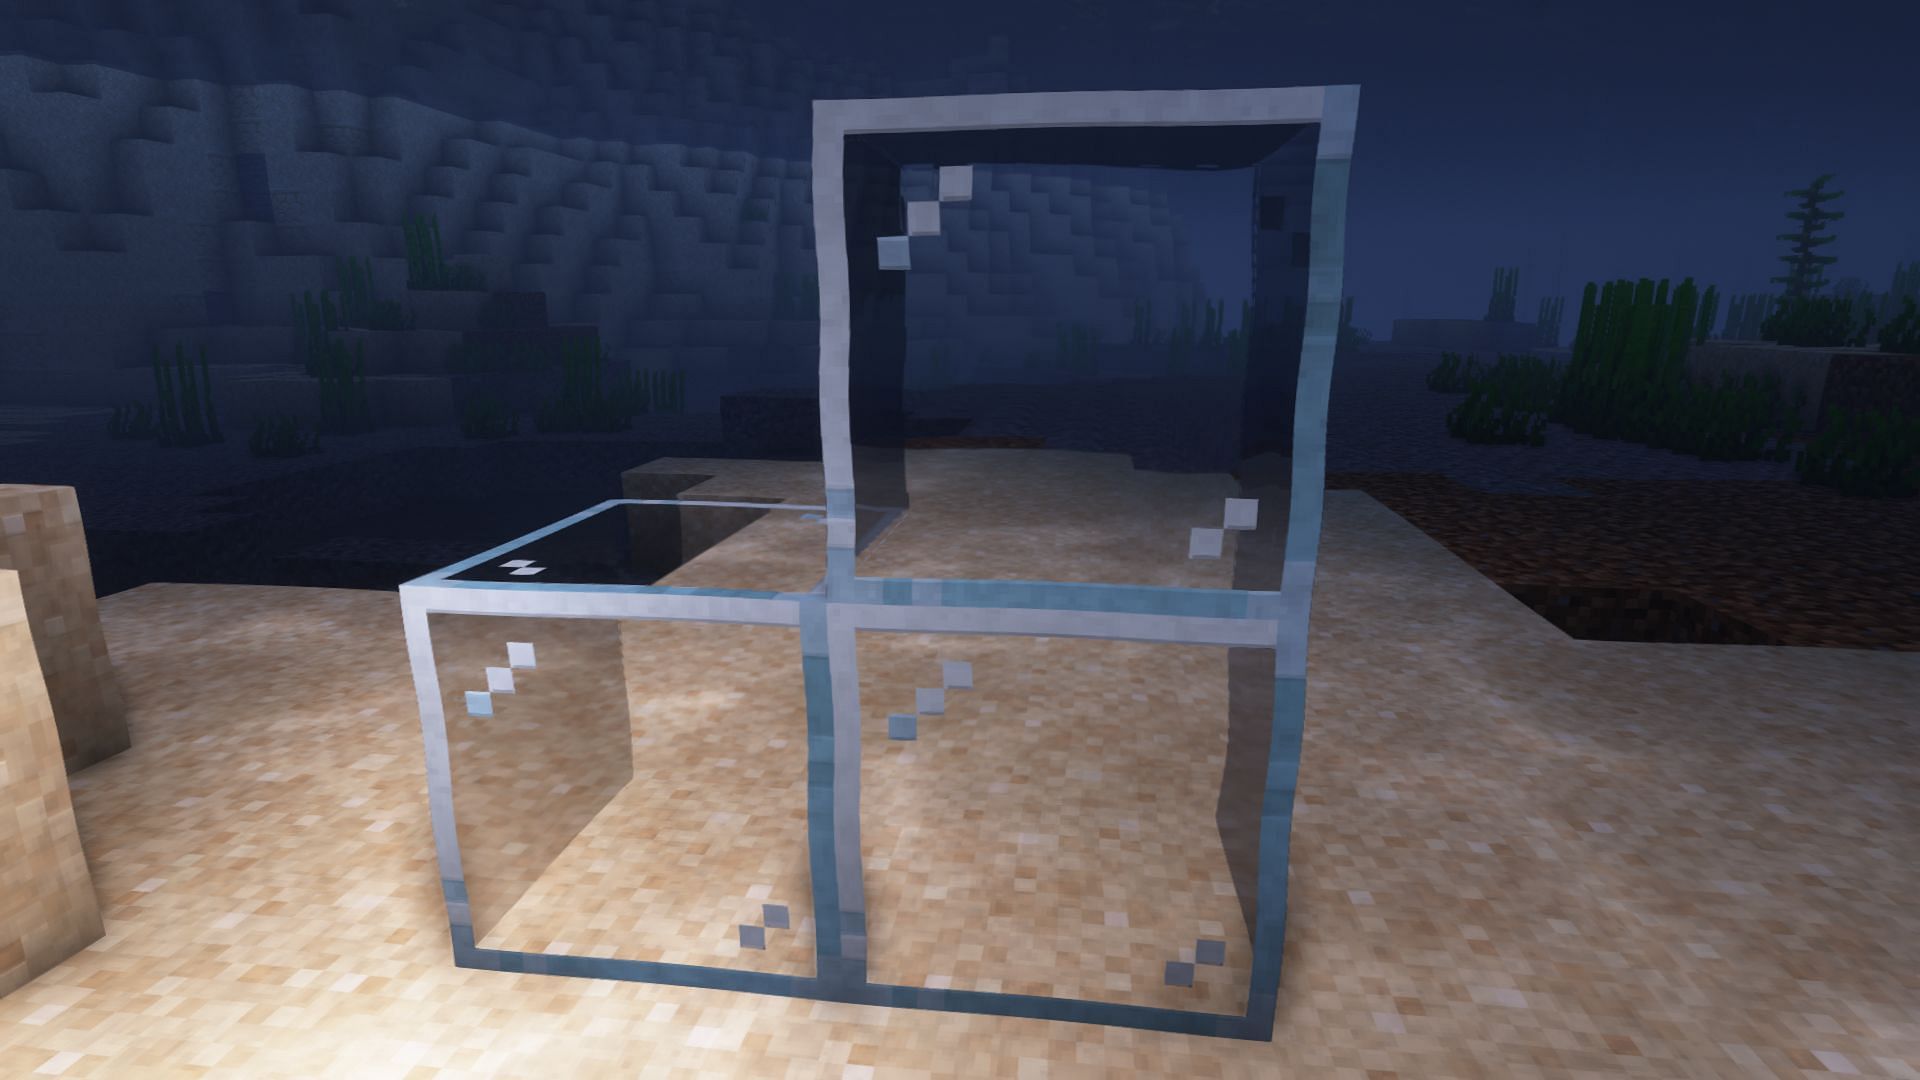 Glass allows players to look around the underwater world from their underwater build in Minecraft (Image via Mojang)